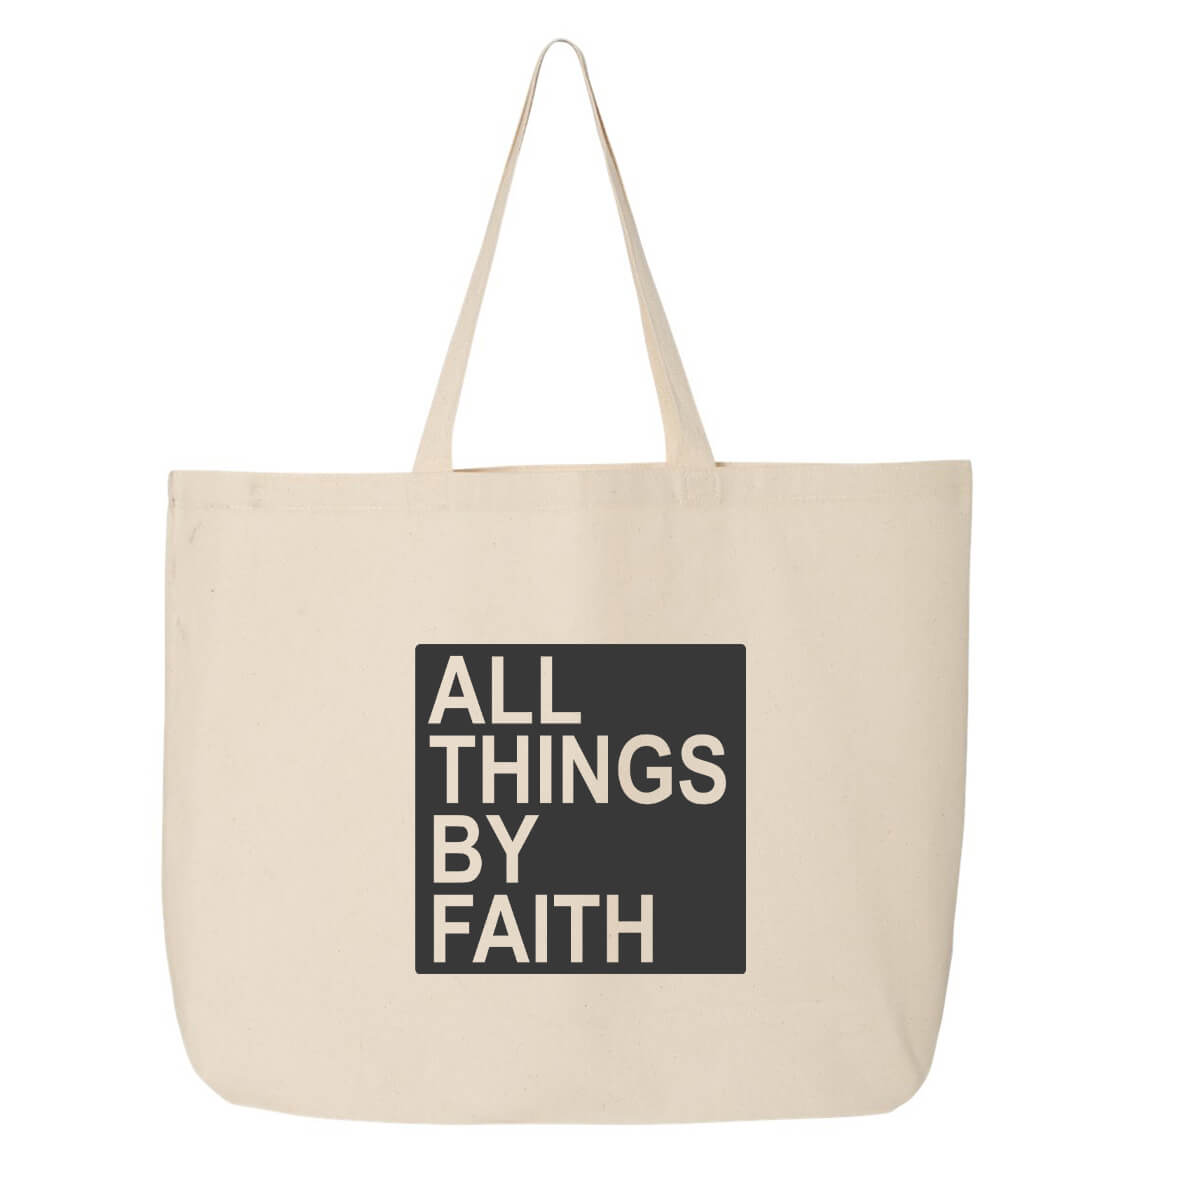 All Things By Faith Jumbo Tote Canvas Bag